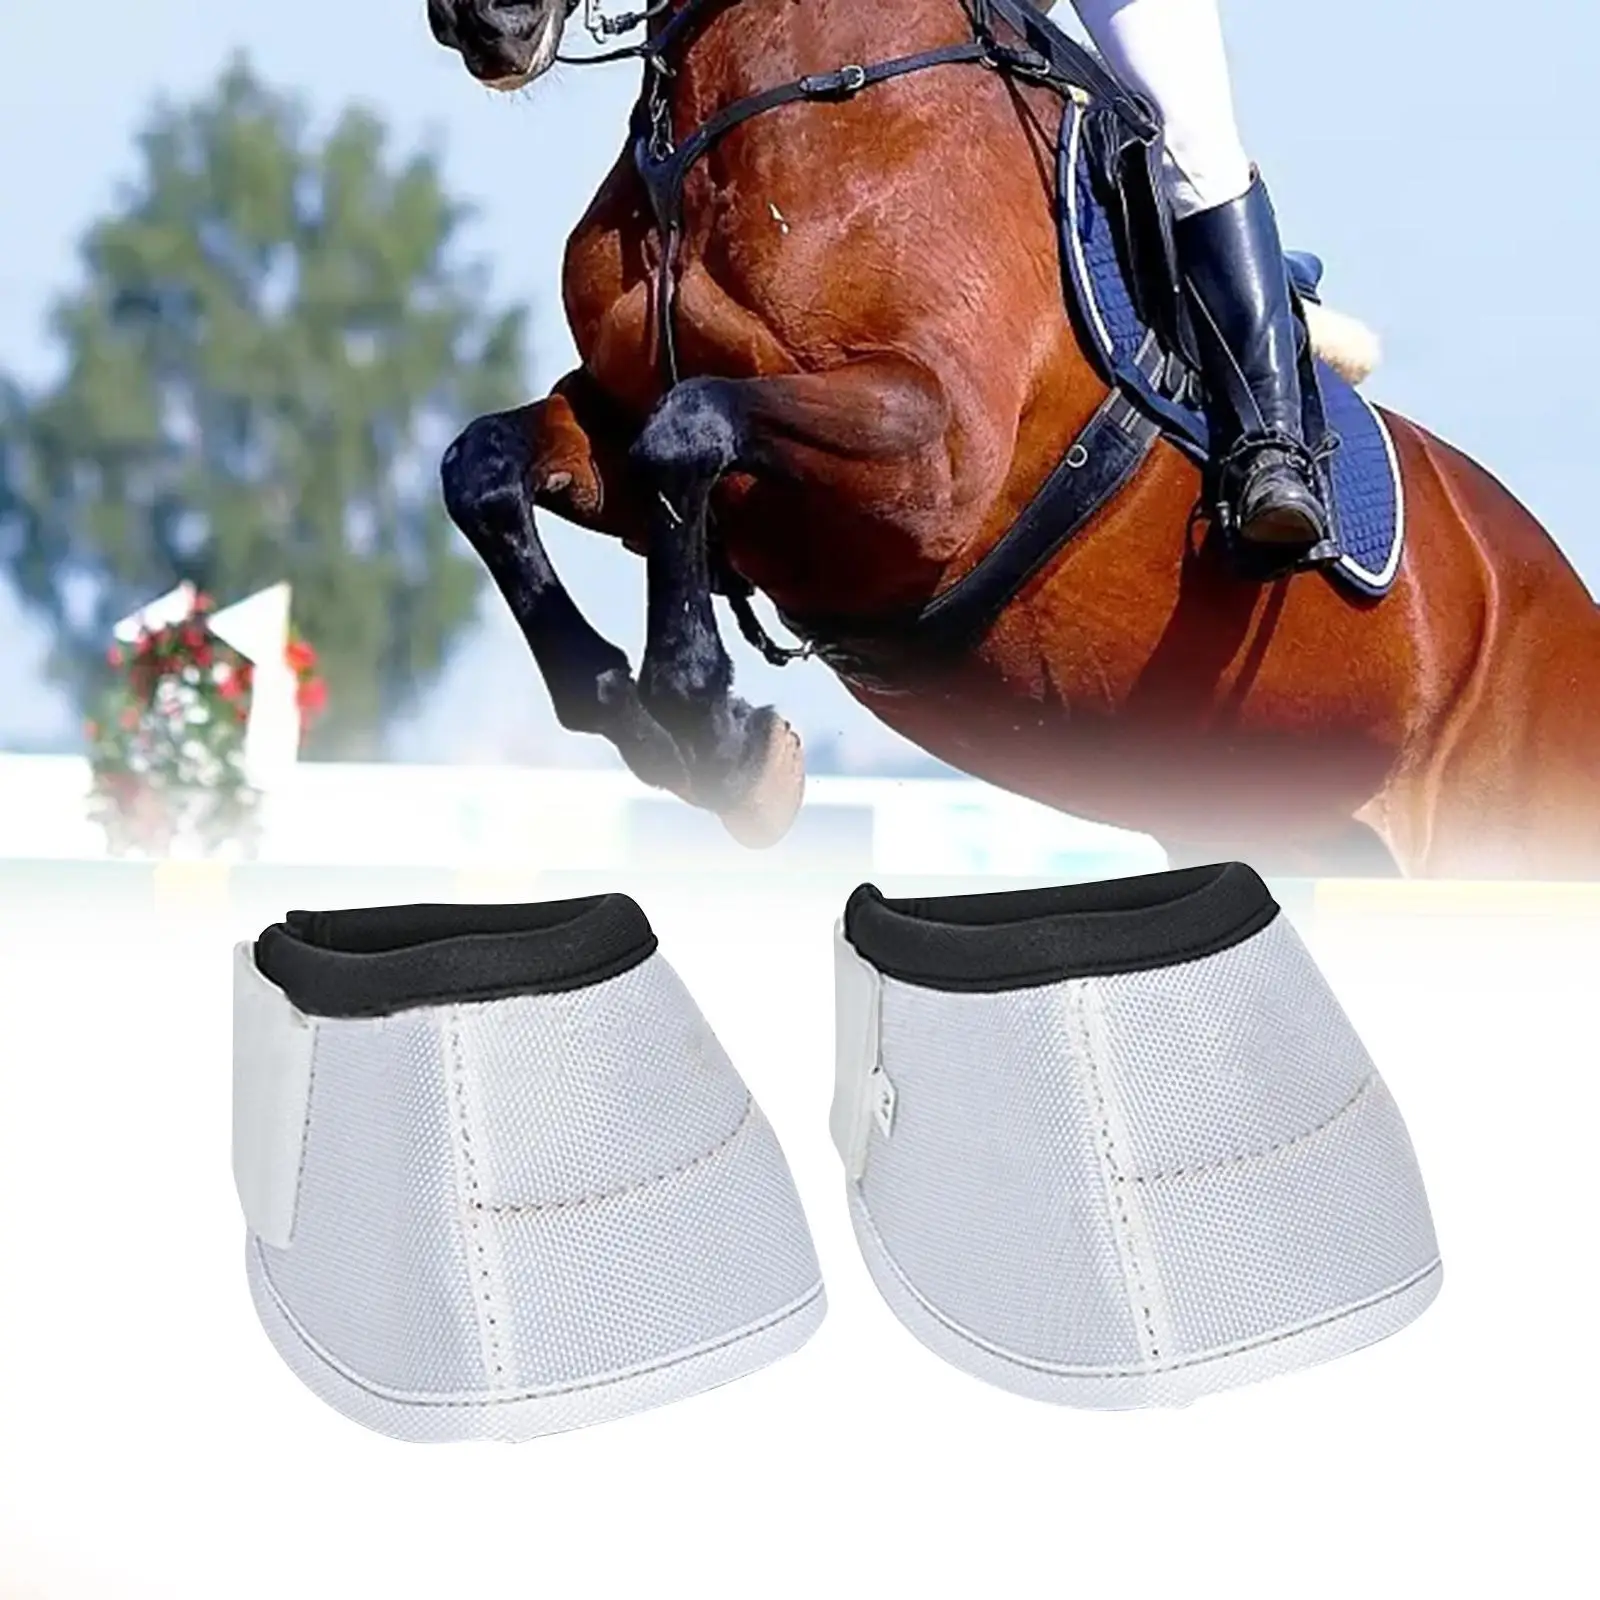 2Pcs Horse Bell Boots Horse Care Boot Flexible and Tough Shock Absorbing Equine Boots Wear Resistant for Riding and Turnout